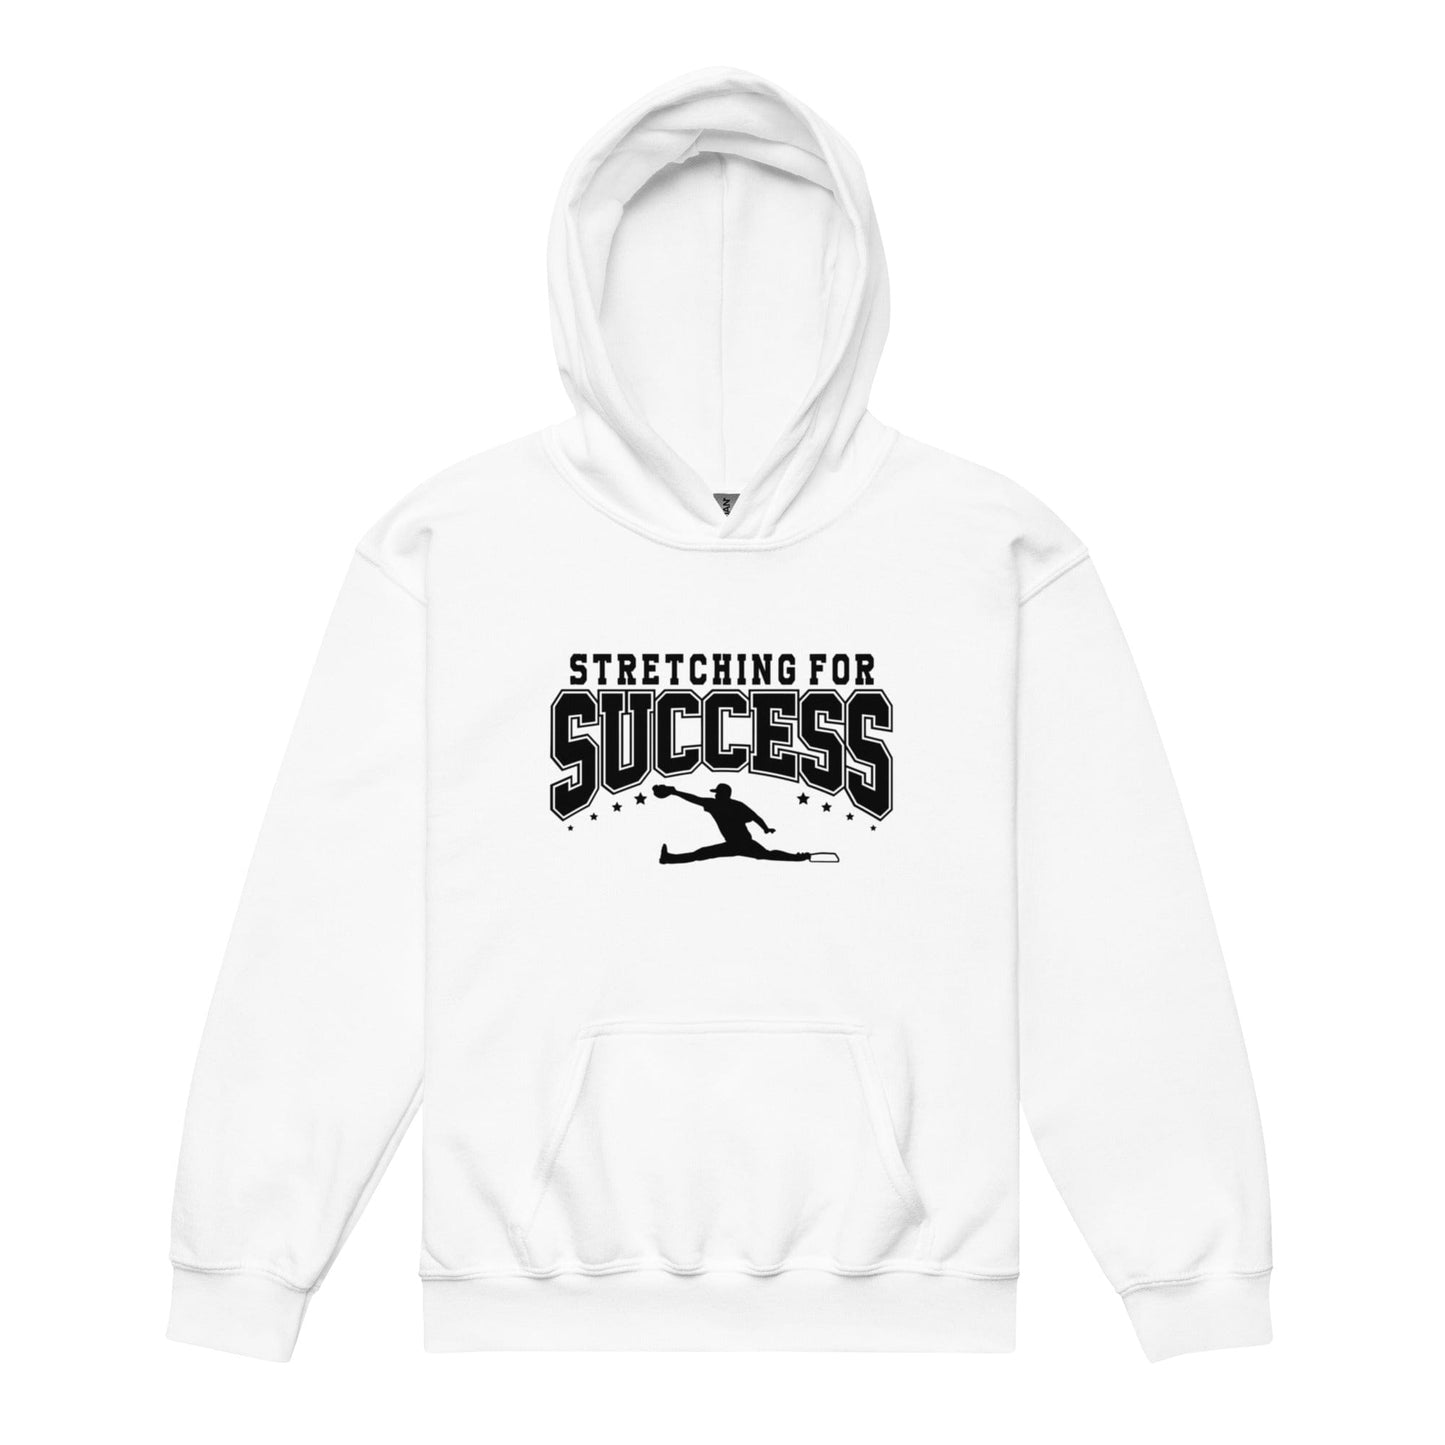 Stretching For Success - Youth Hoodie